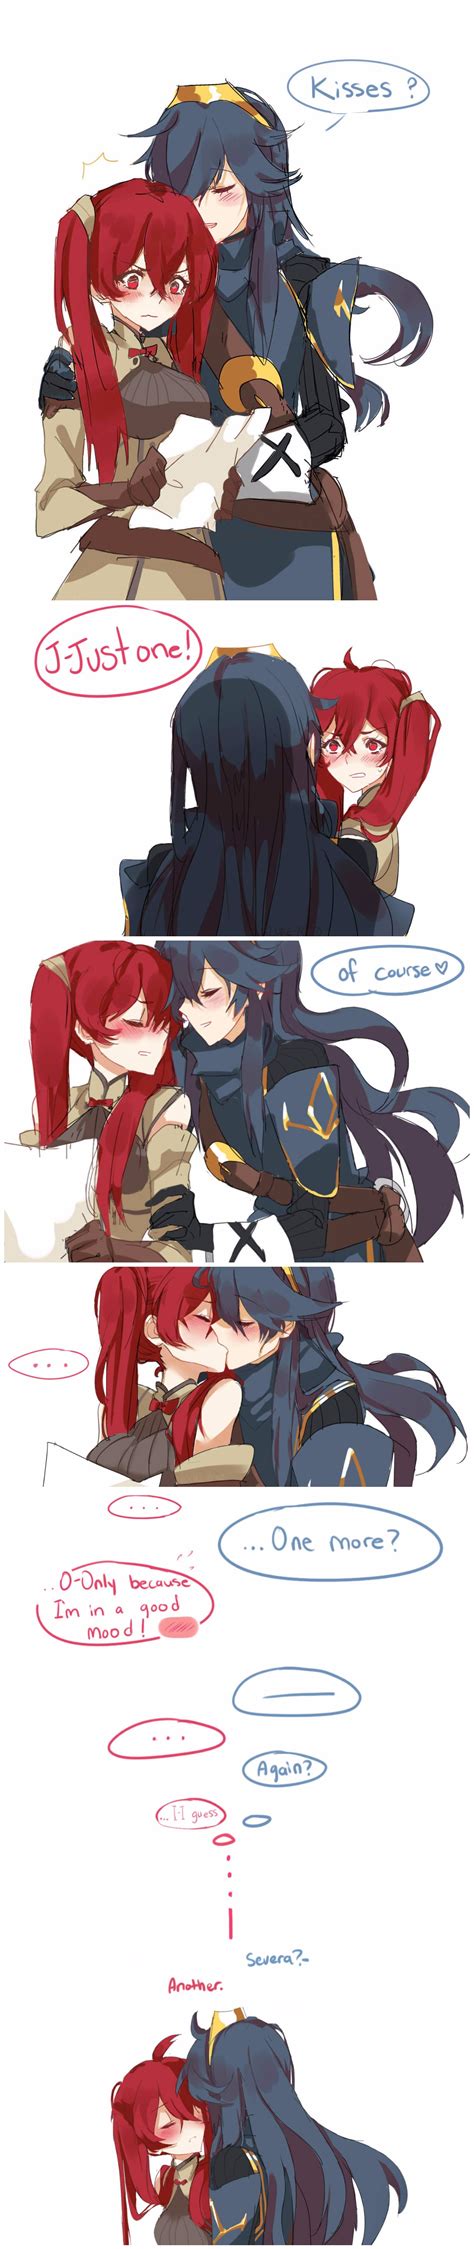 Pin On Lucina